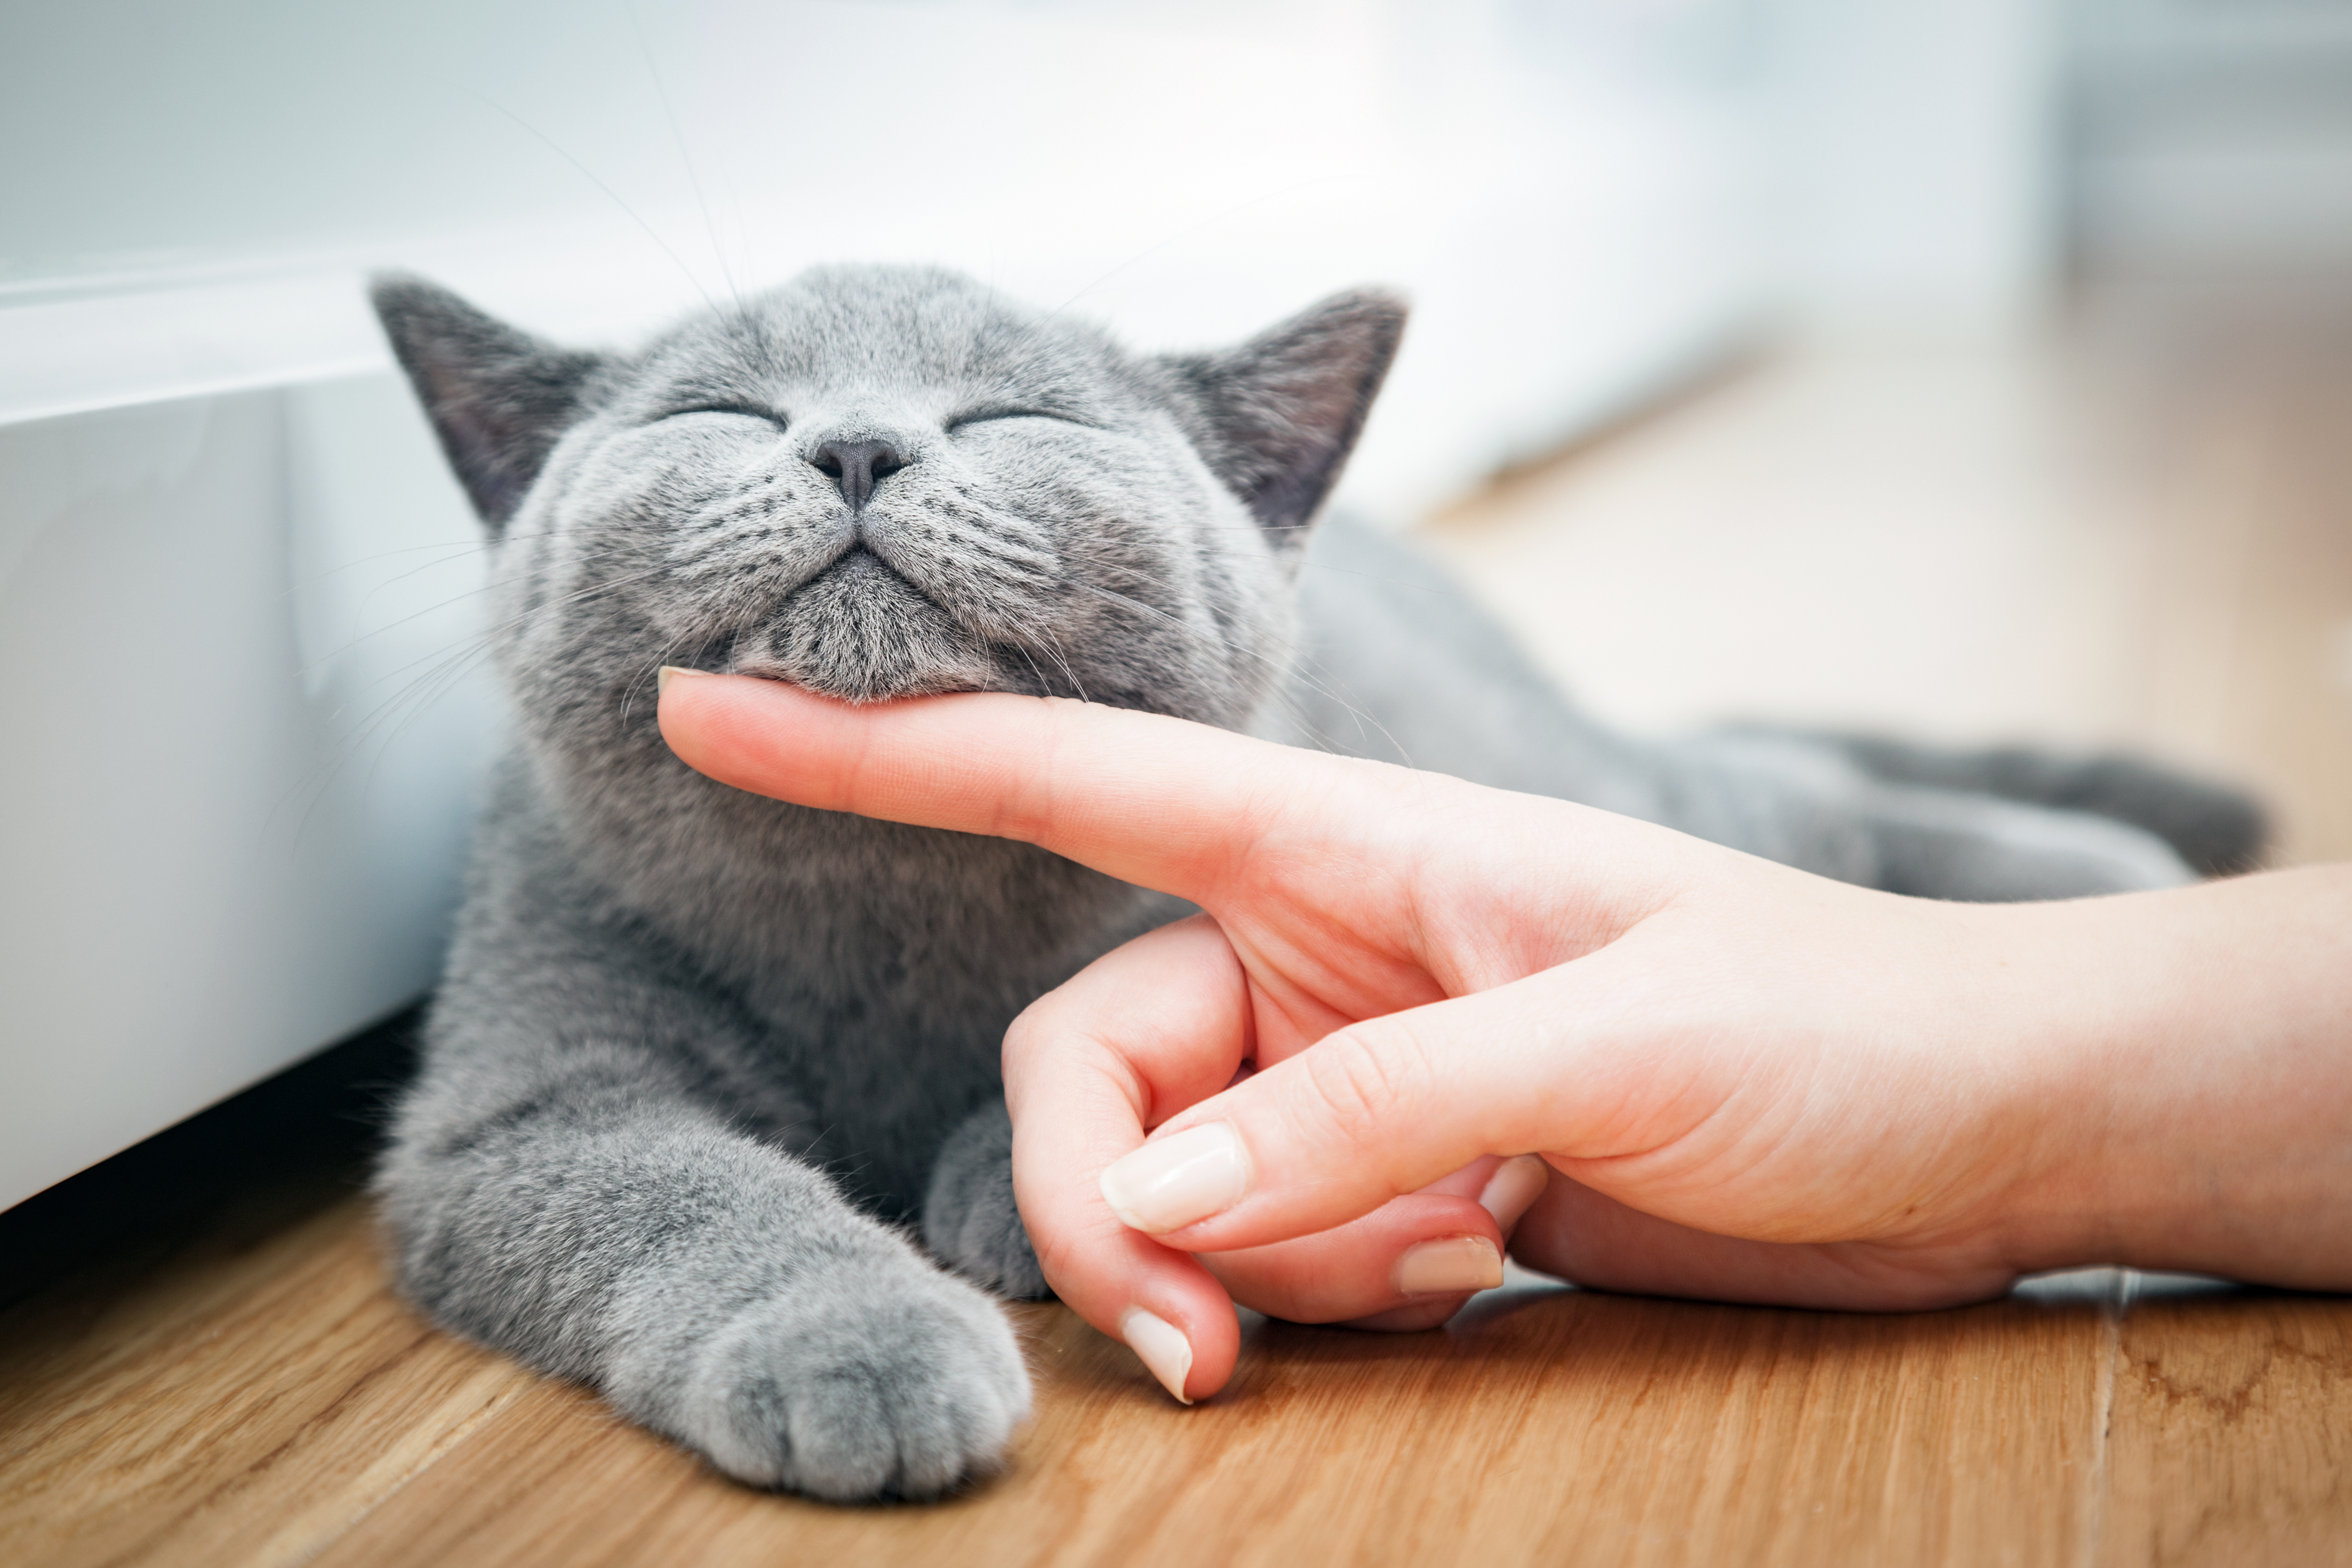 Purring Explained: Why Do Cats Purr and What Does It Mean?